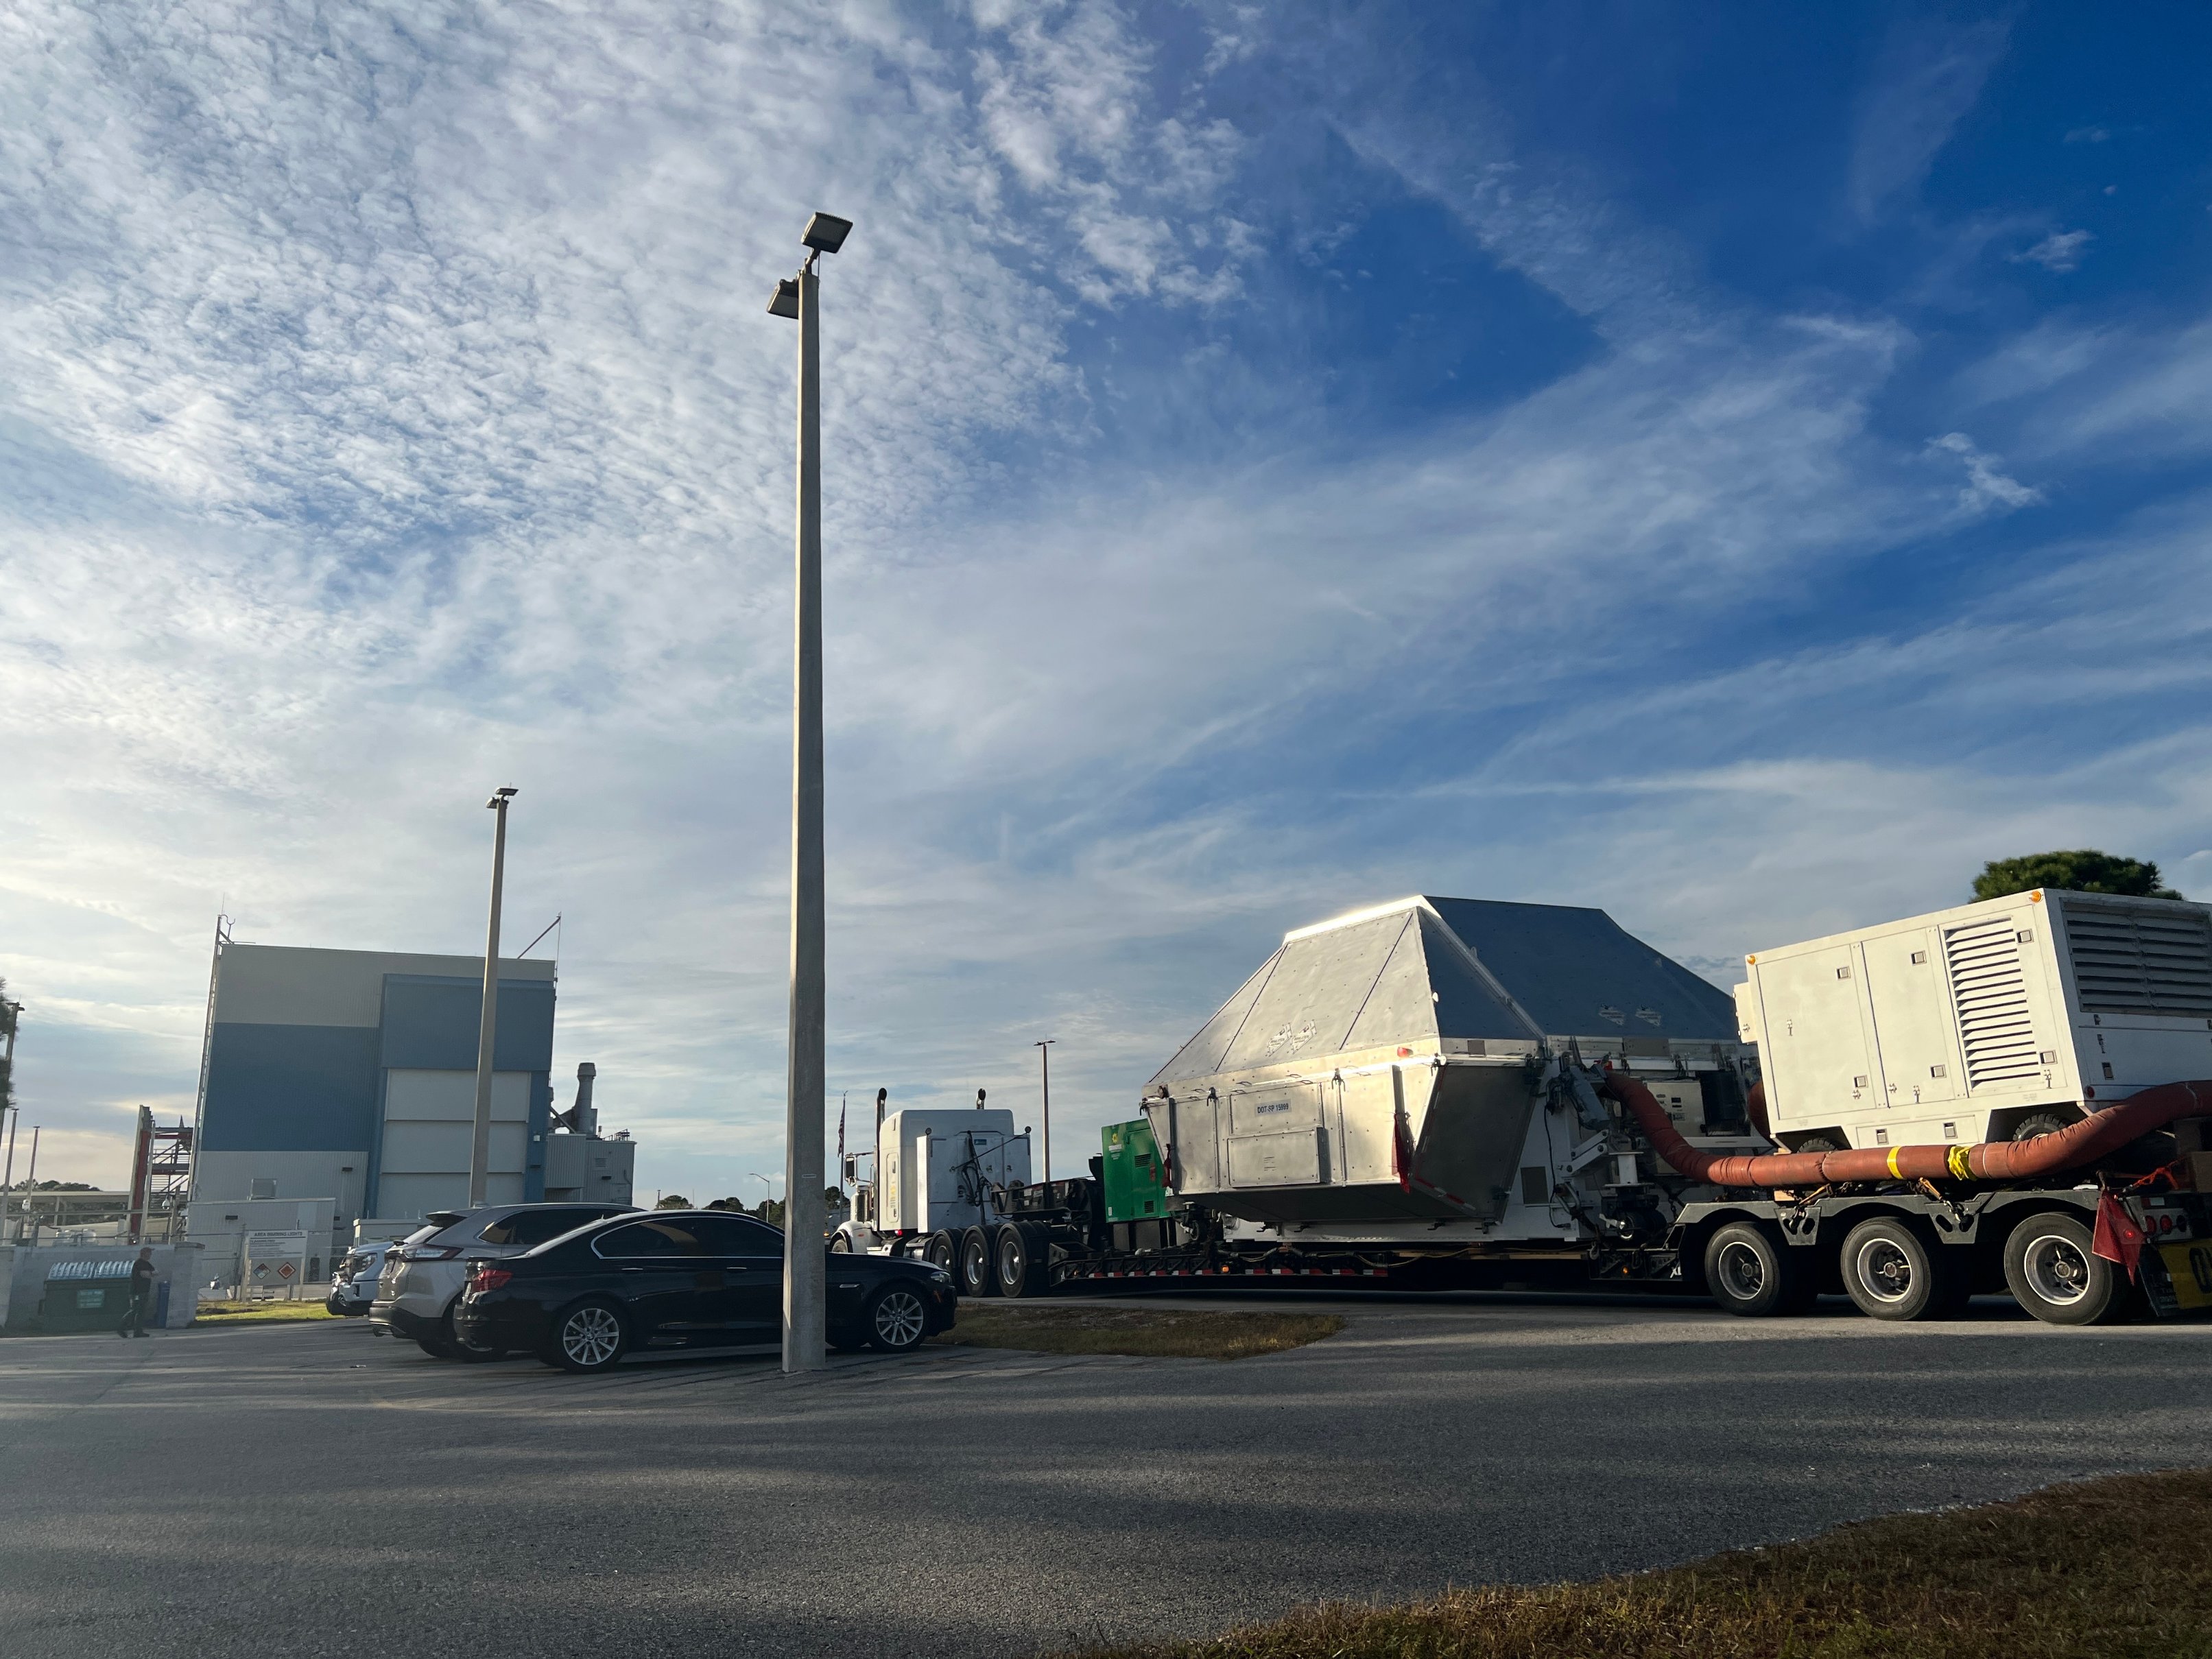 Members of the Artemis 1 team process and analyze the Orion Space Capsule arriving at the Kennedy Space Center in Florida on December 30, 2022.